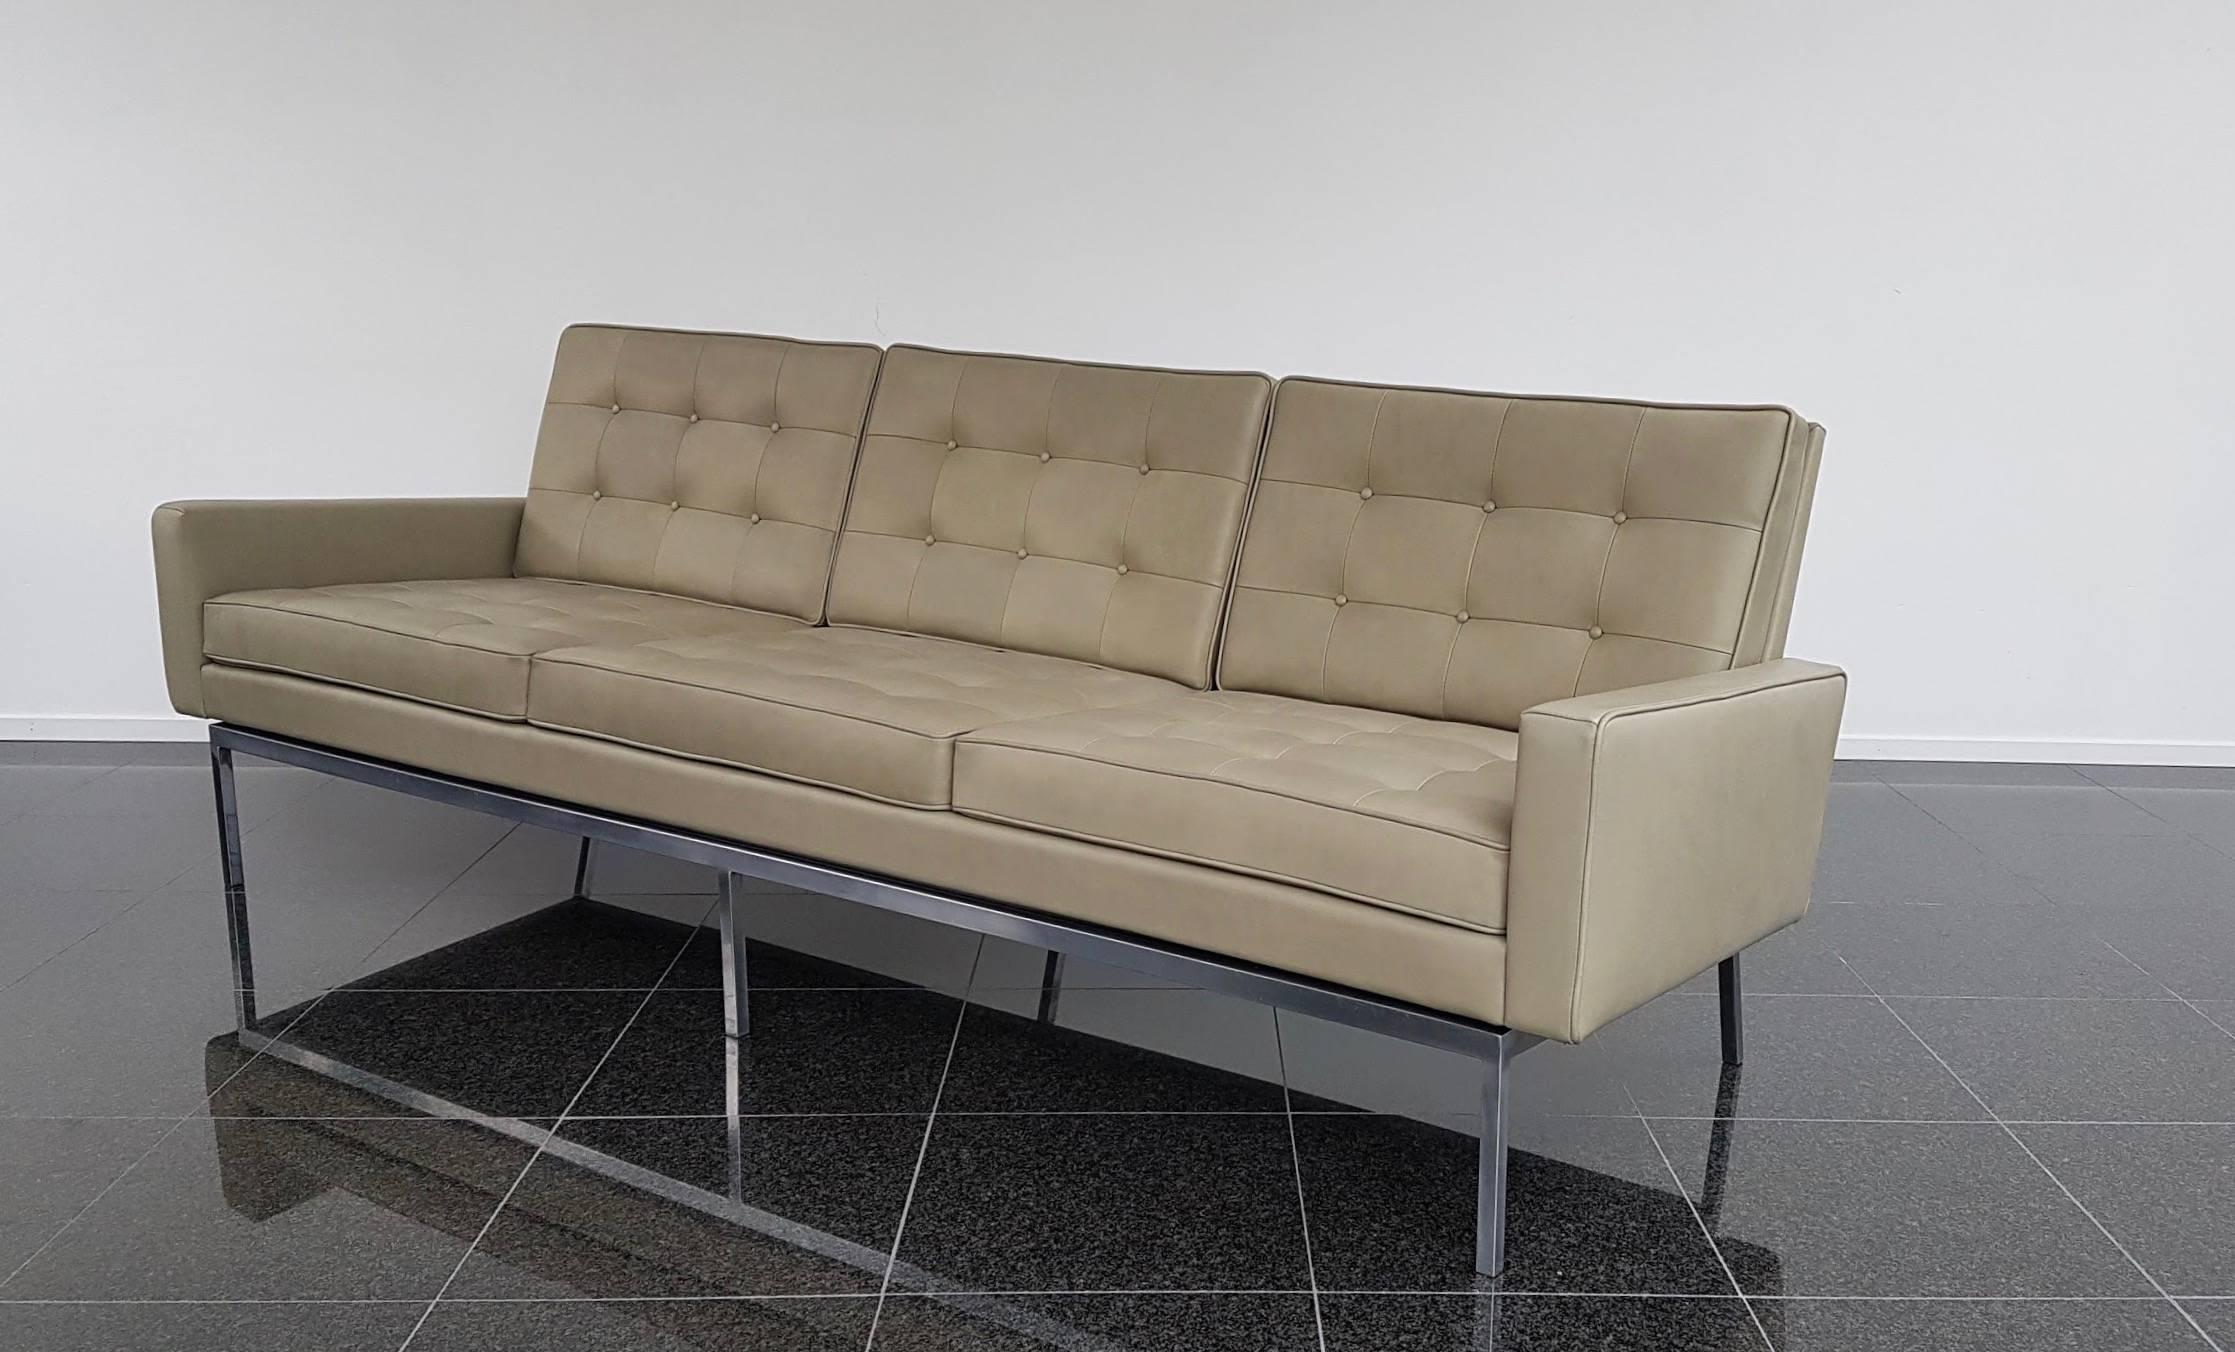 This sofa model 67A was designed in 1958 by American designer Florence Knoll and has been completely restored with attention to every original detail. Used is a olive-green very exclusive full aniline leather with a velvet soft touch that is